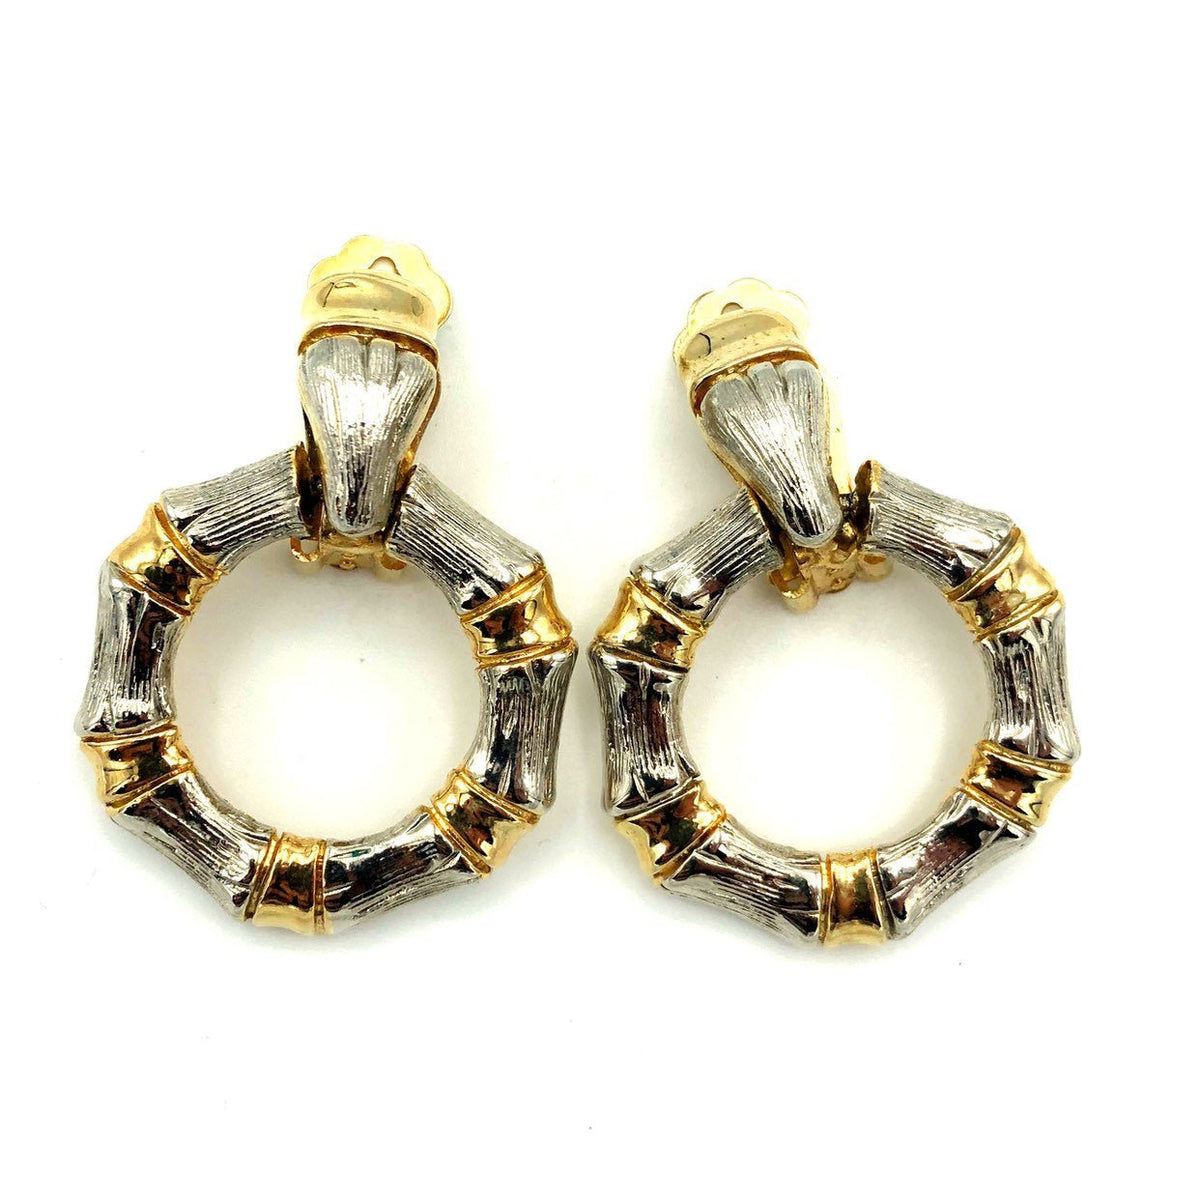 Silver & Gold Bamboo Door Knocker Vintage Clip-On Earrings - 24 Wishes Vintage Jewelry